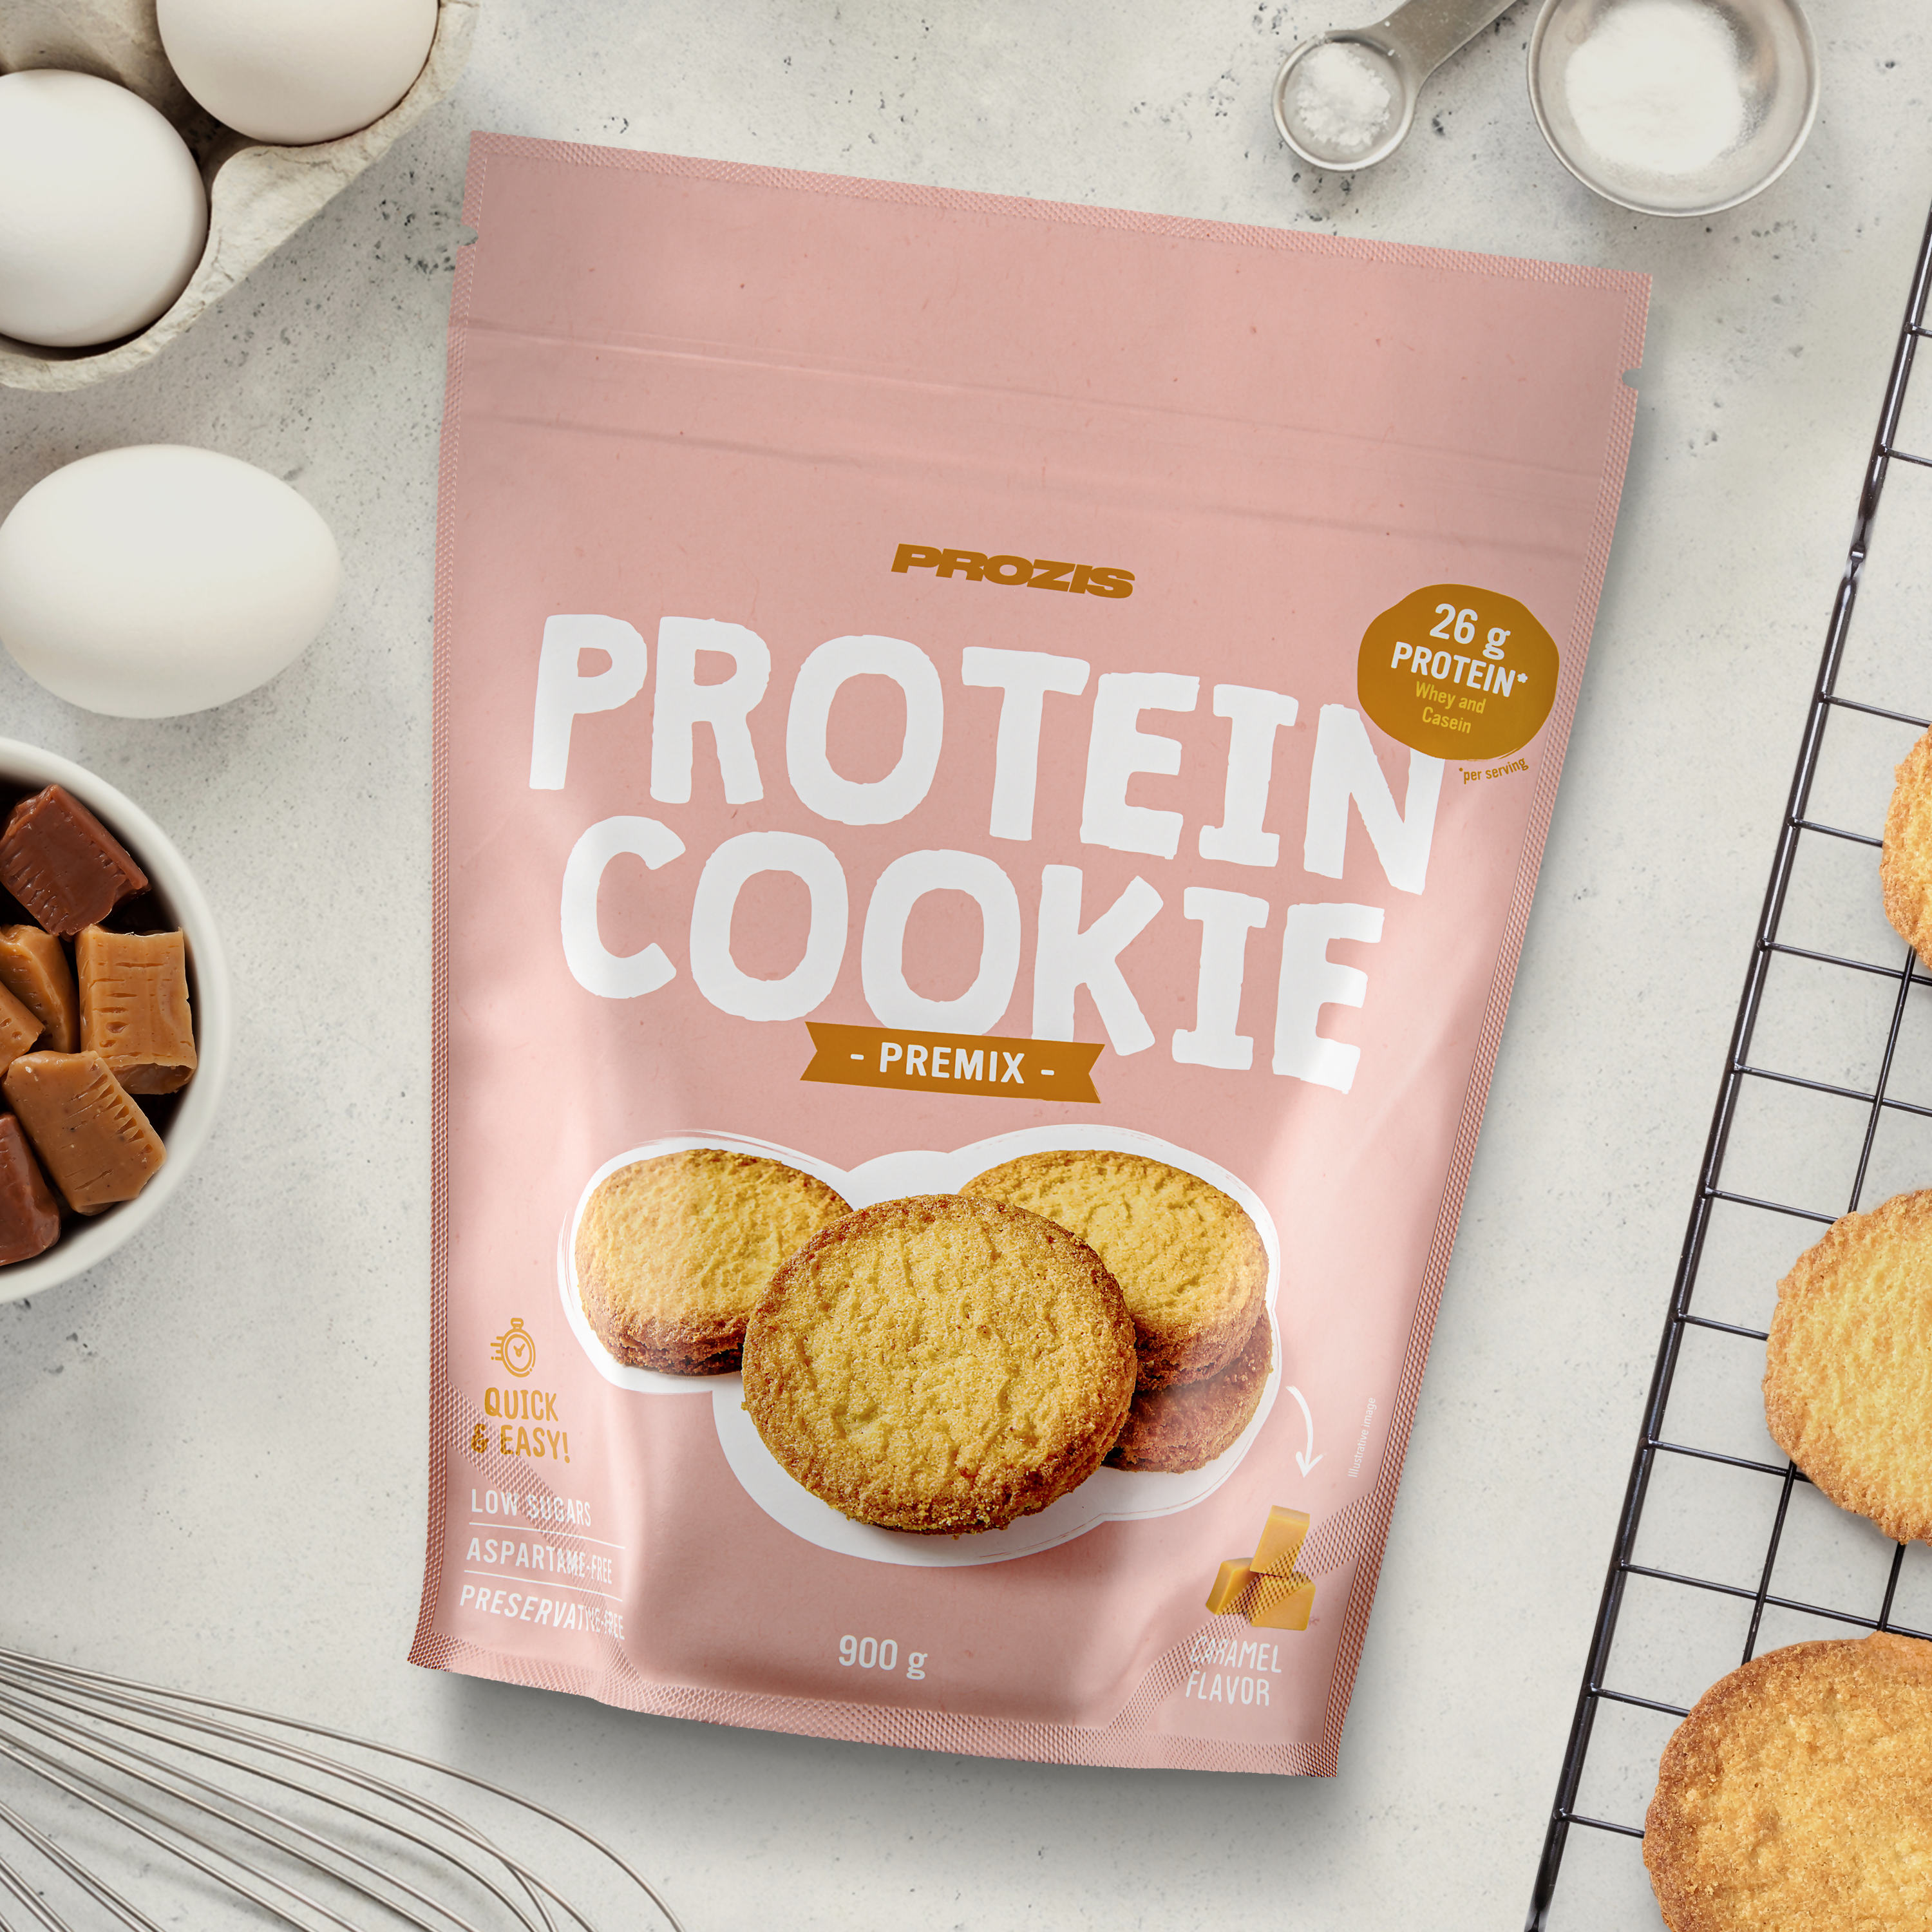 Protein Cookies 900 g & Derivatives | Prozis